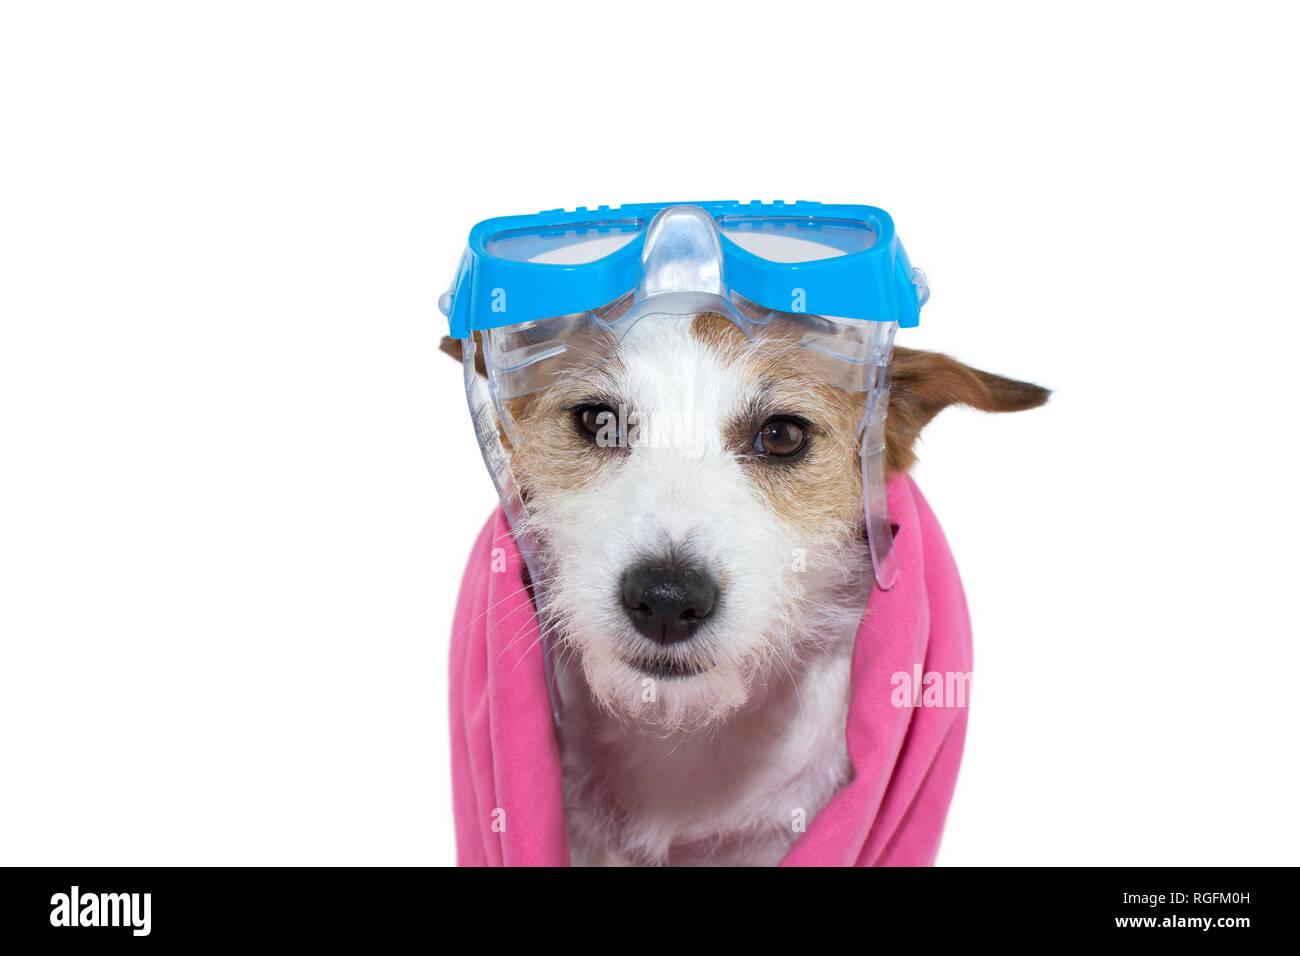 SWIMMING DOG ON SUMMER. JACK RUSSELL PUPPY WITH GOGGLES AND A PINK TOWEL. ISOLATED SHOT AGAINST WHITE BACKGROUND. Stock Photo